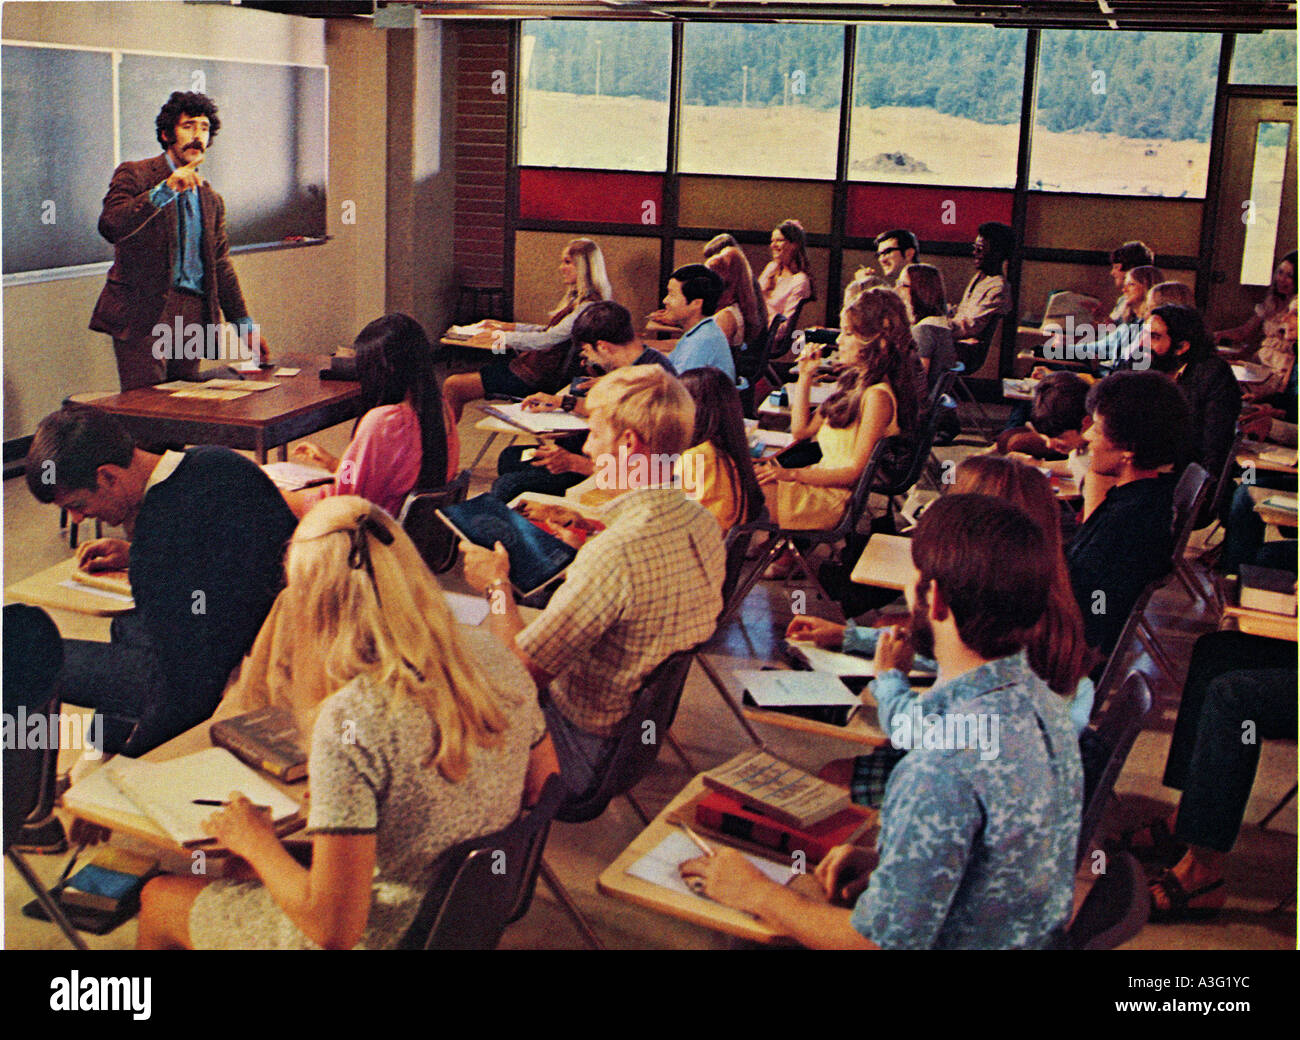 GETTING  STRAIGHT 1970 Columbia film with Elliot Gould Stock Photo